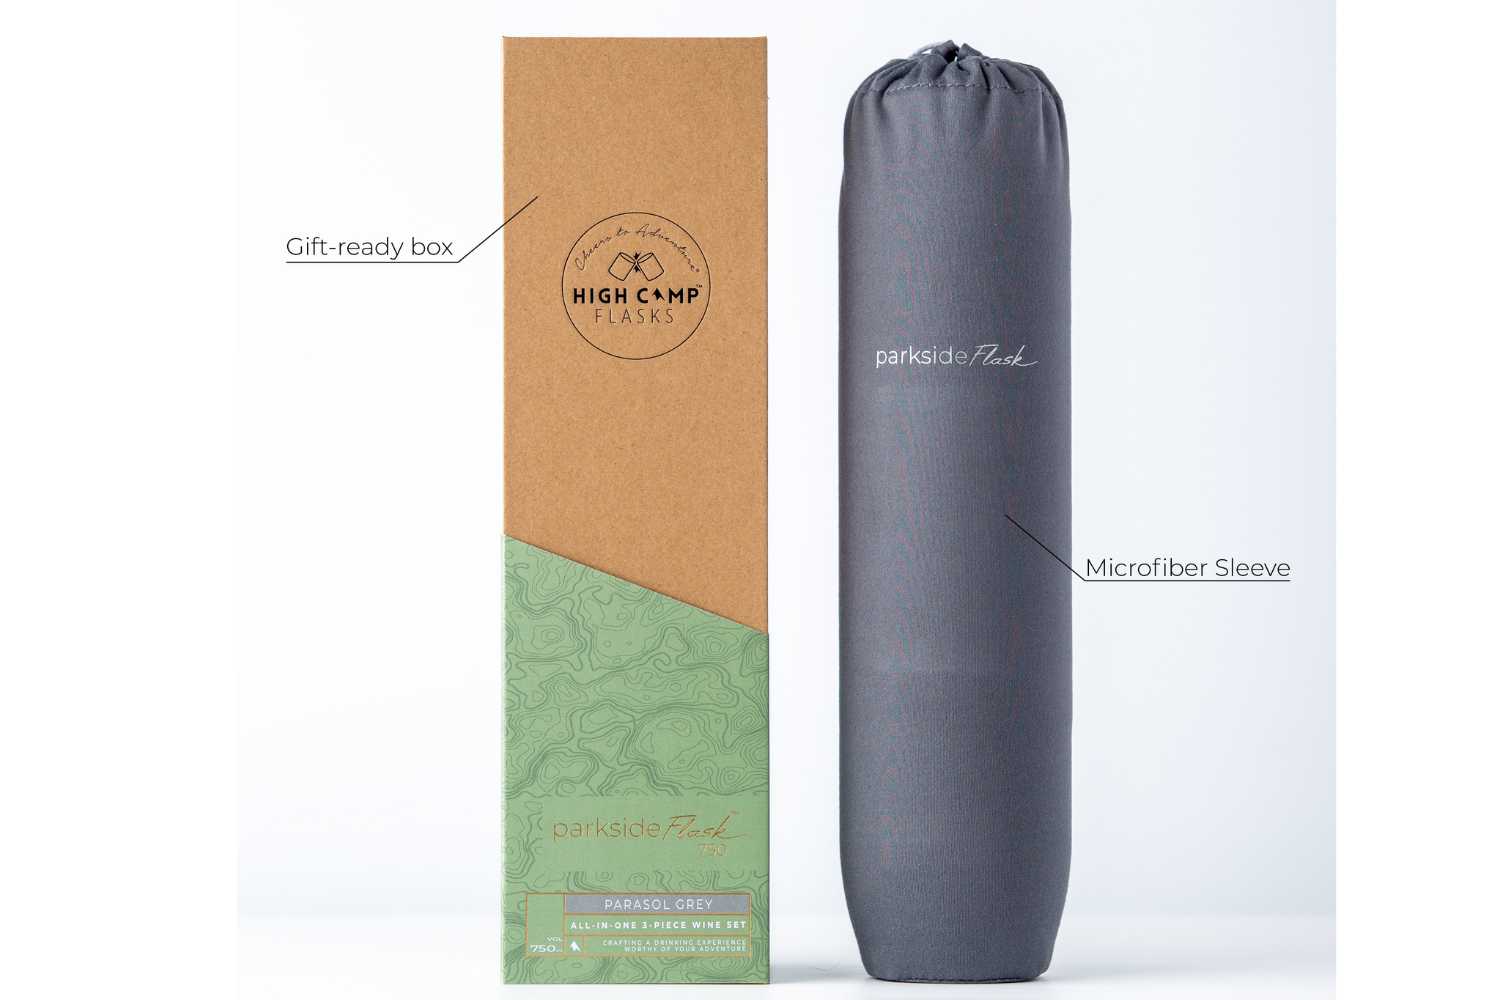 WINE THERMOS WITH INSULATED TUMBLERS, PACKED IN GIFT BOX